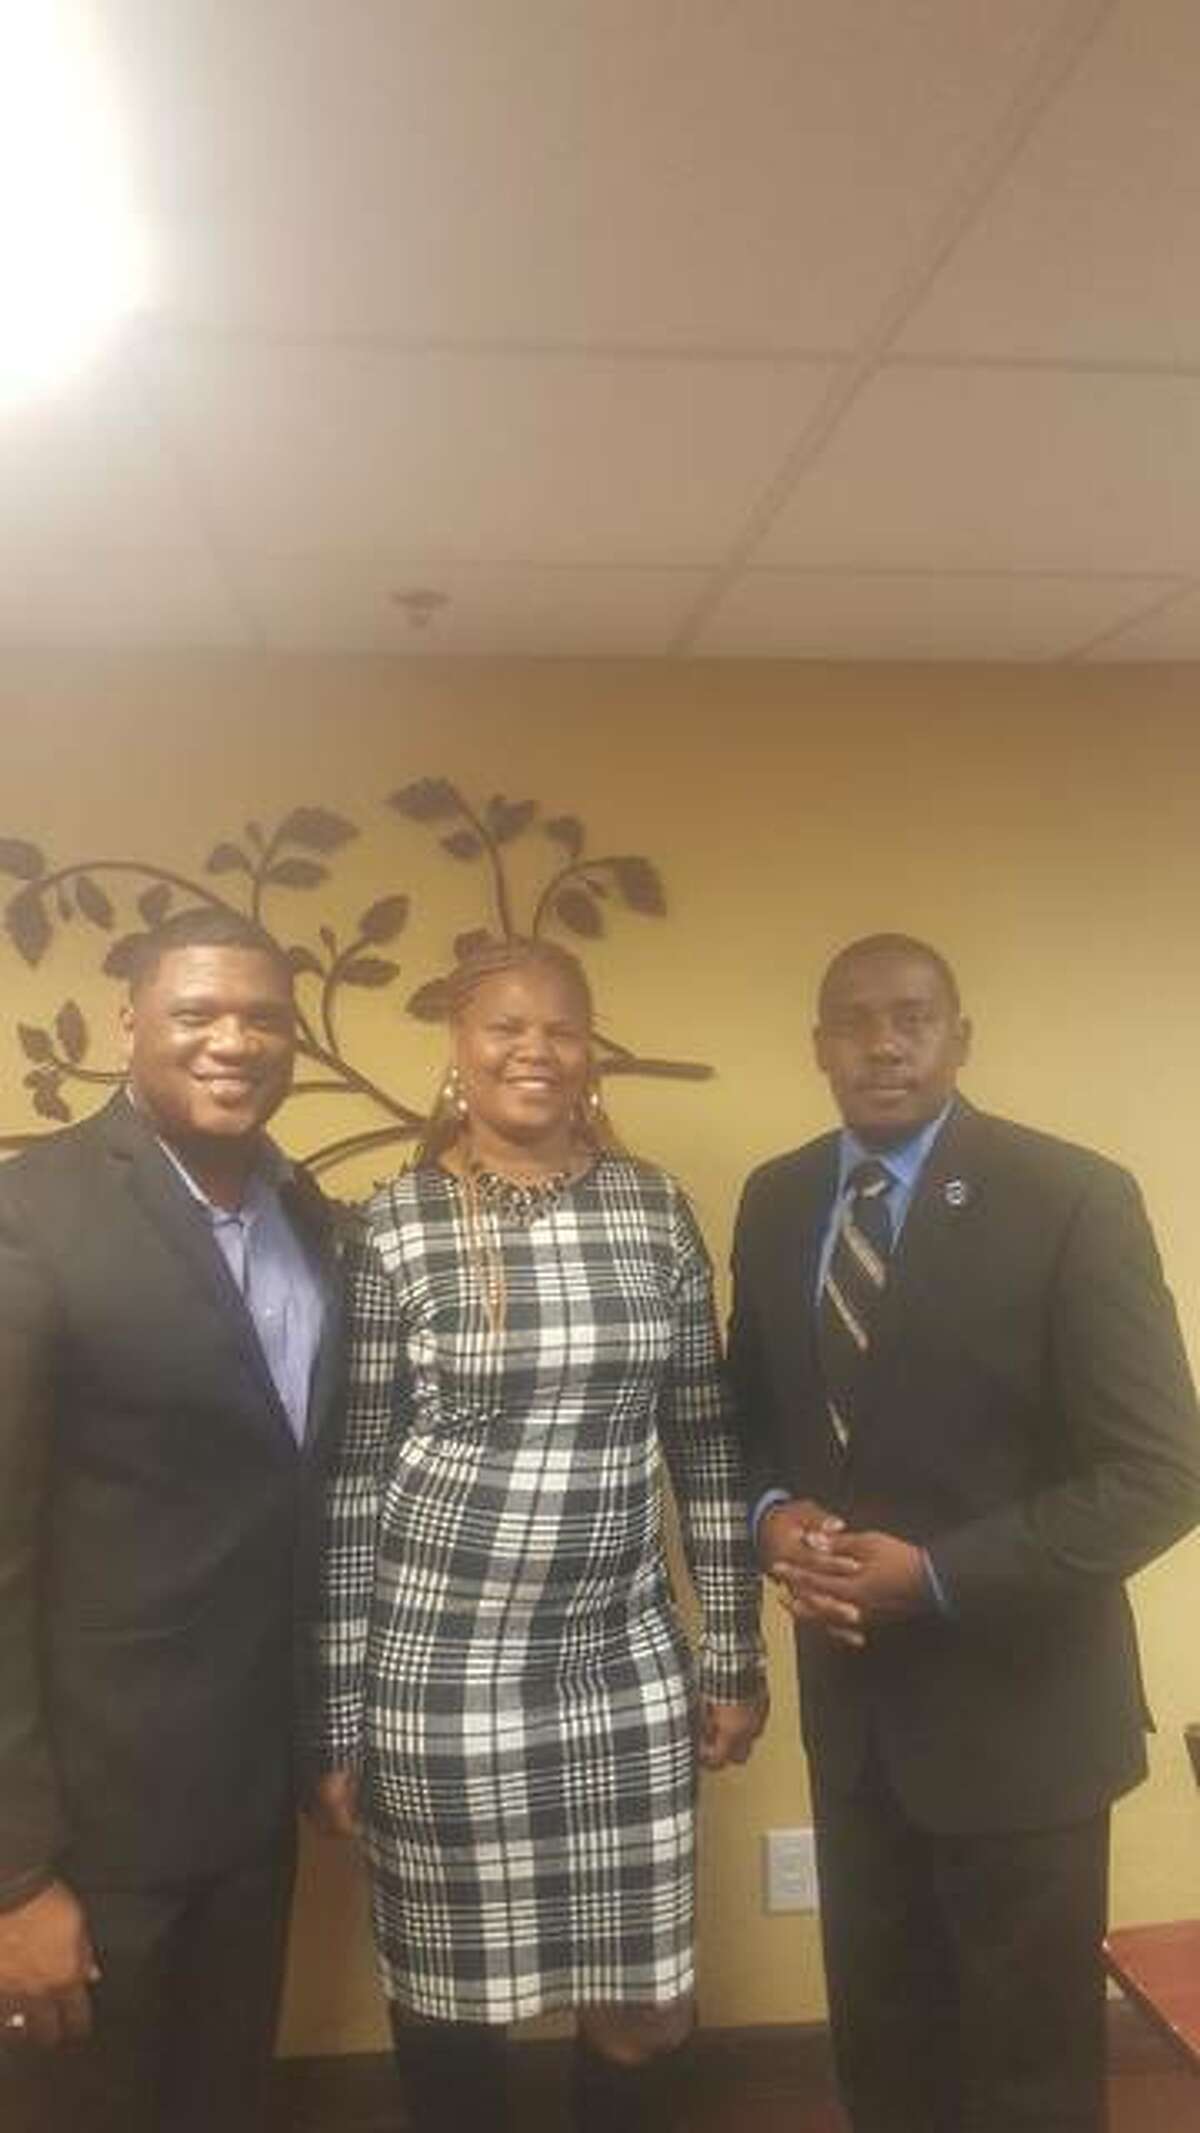 From left to right, the Black Chamber of Commerce of Illinois’ founder and state President Anthony “Corey” Walker, of Decatur, the organization’s Vice President Creola Davis, and Alton chapter President Rev. William Christopher Harris, of Alton.